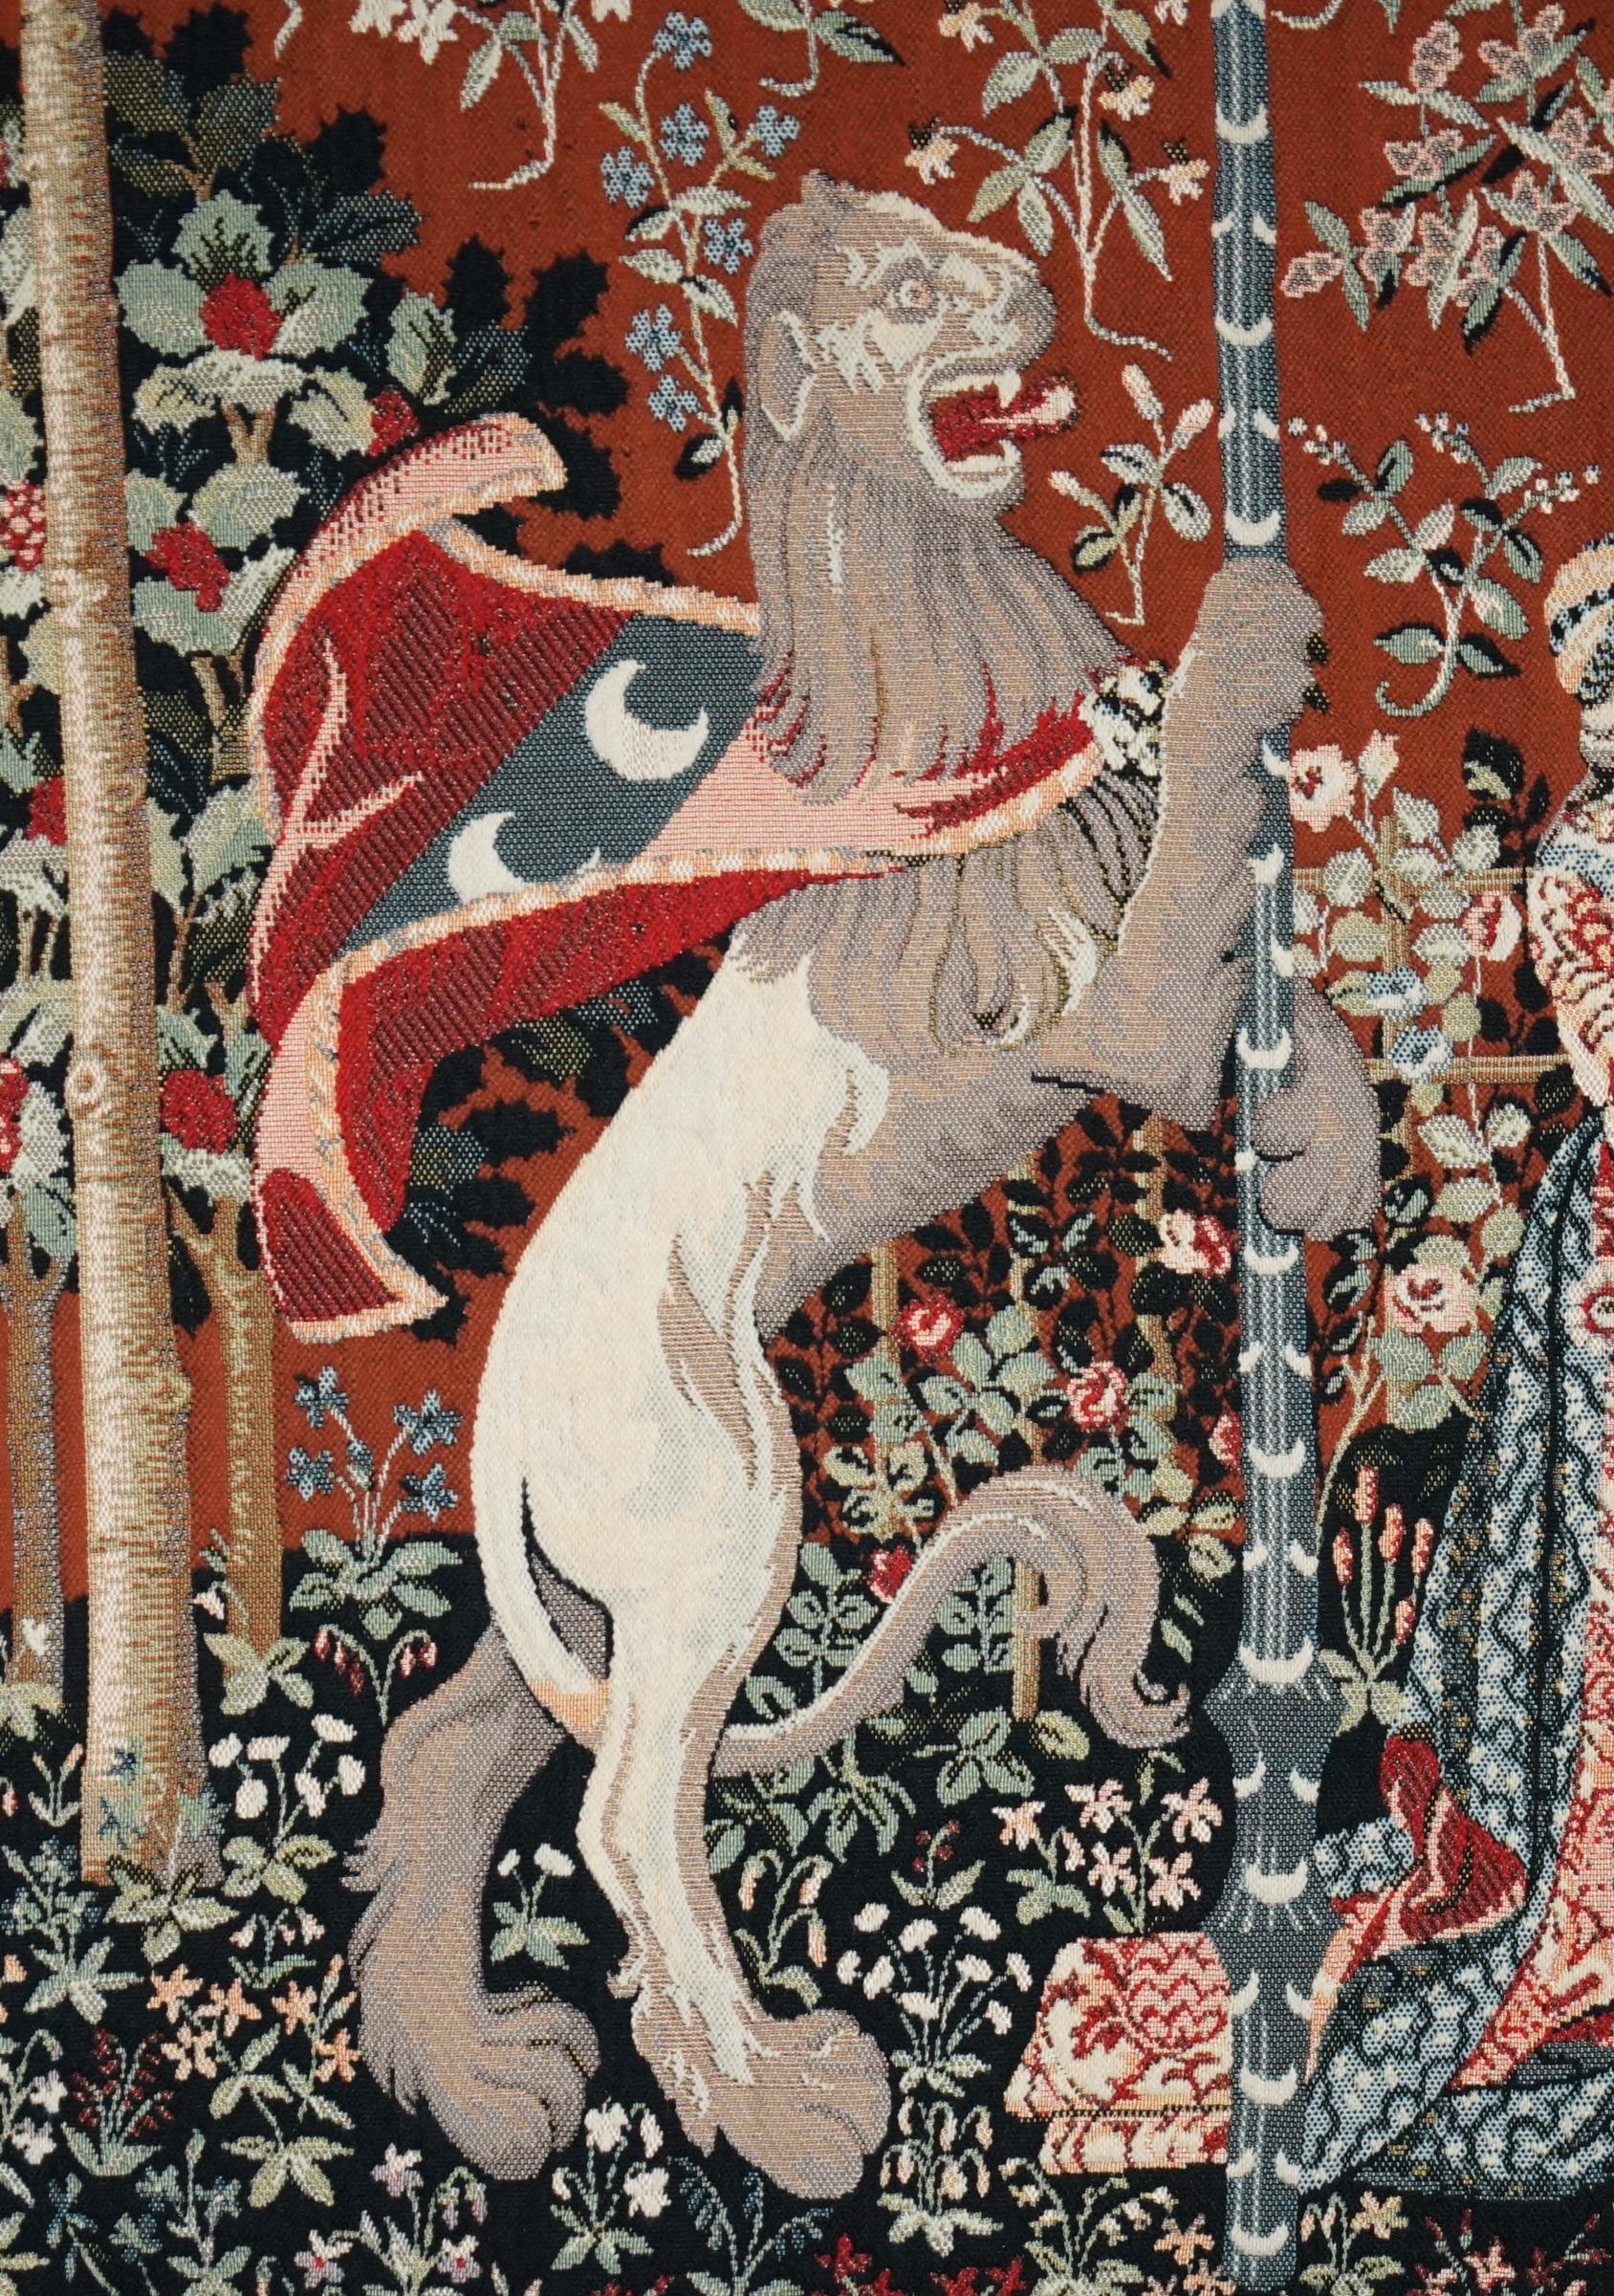 French ViNTAGE THE LADY AND THE UNICORN LARGE WALL HANGING WOVEN TAPESTRY 216CM X 189CM